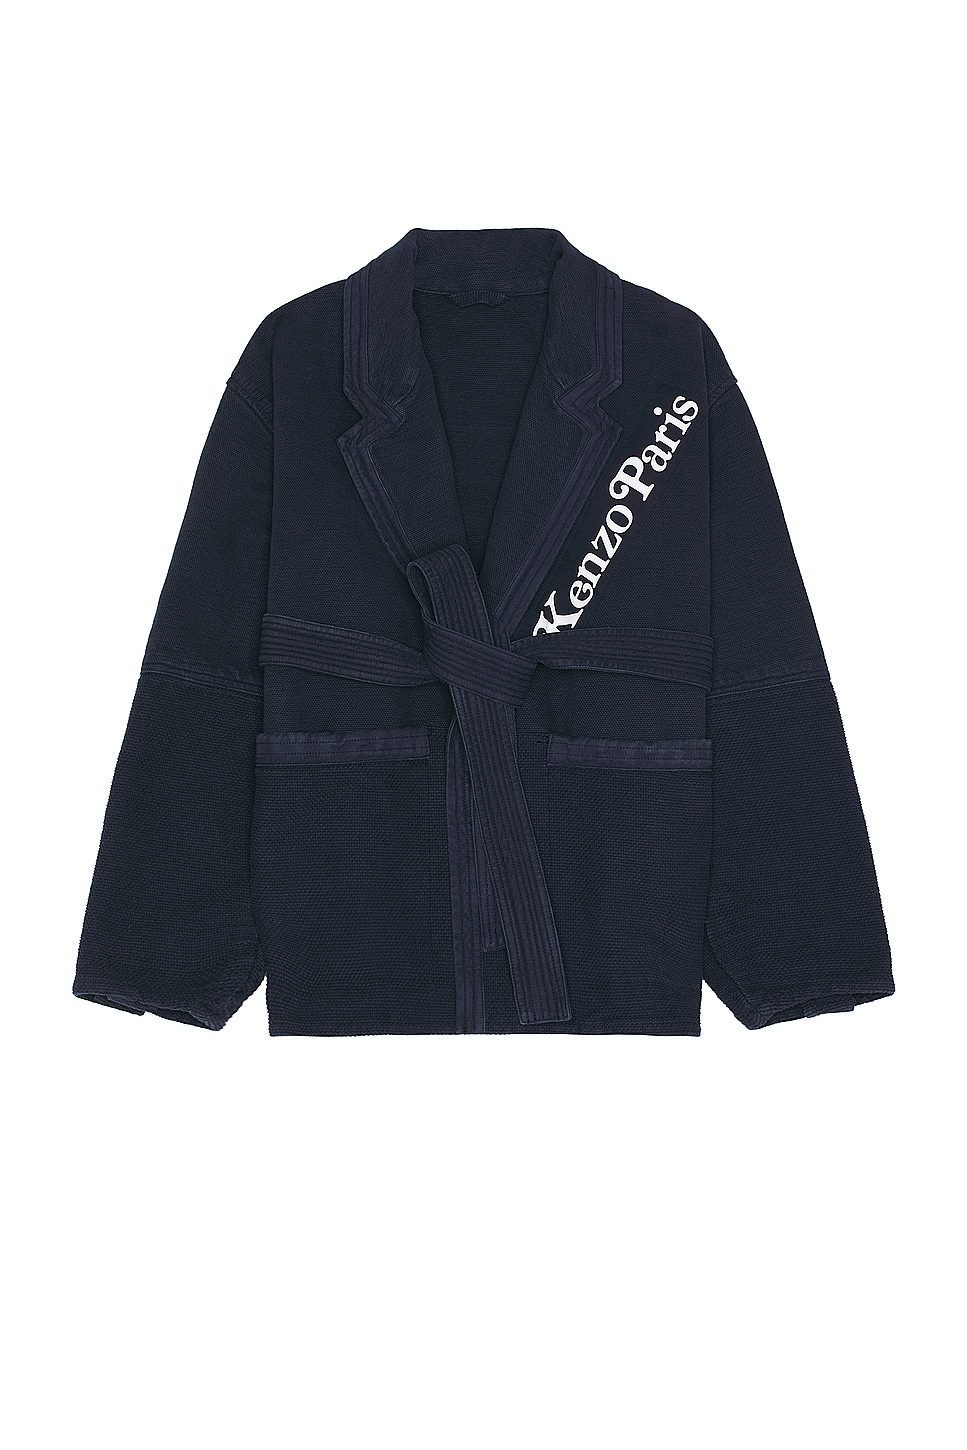 Image 1 of Kenzo By Verdy Judo Jacket in Midnight